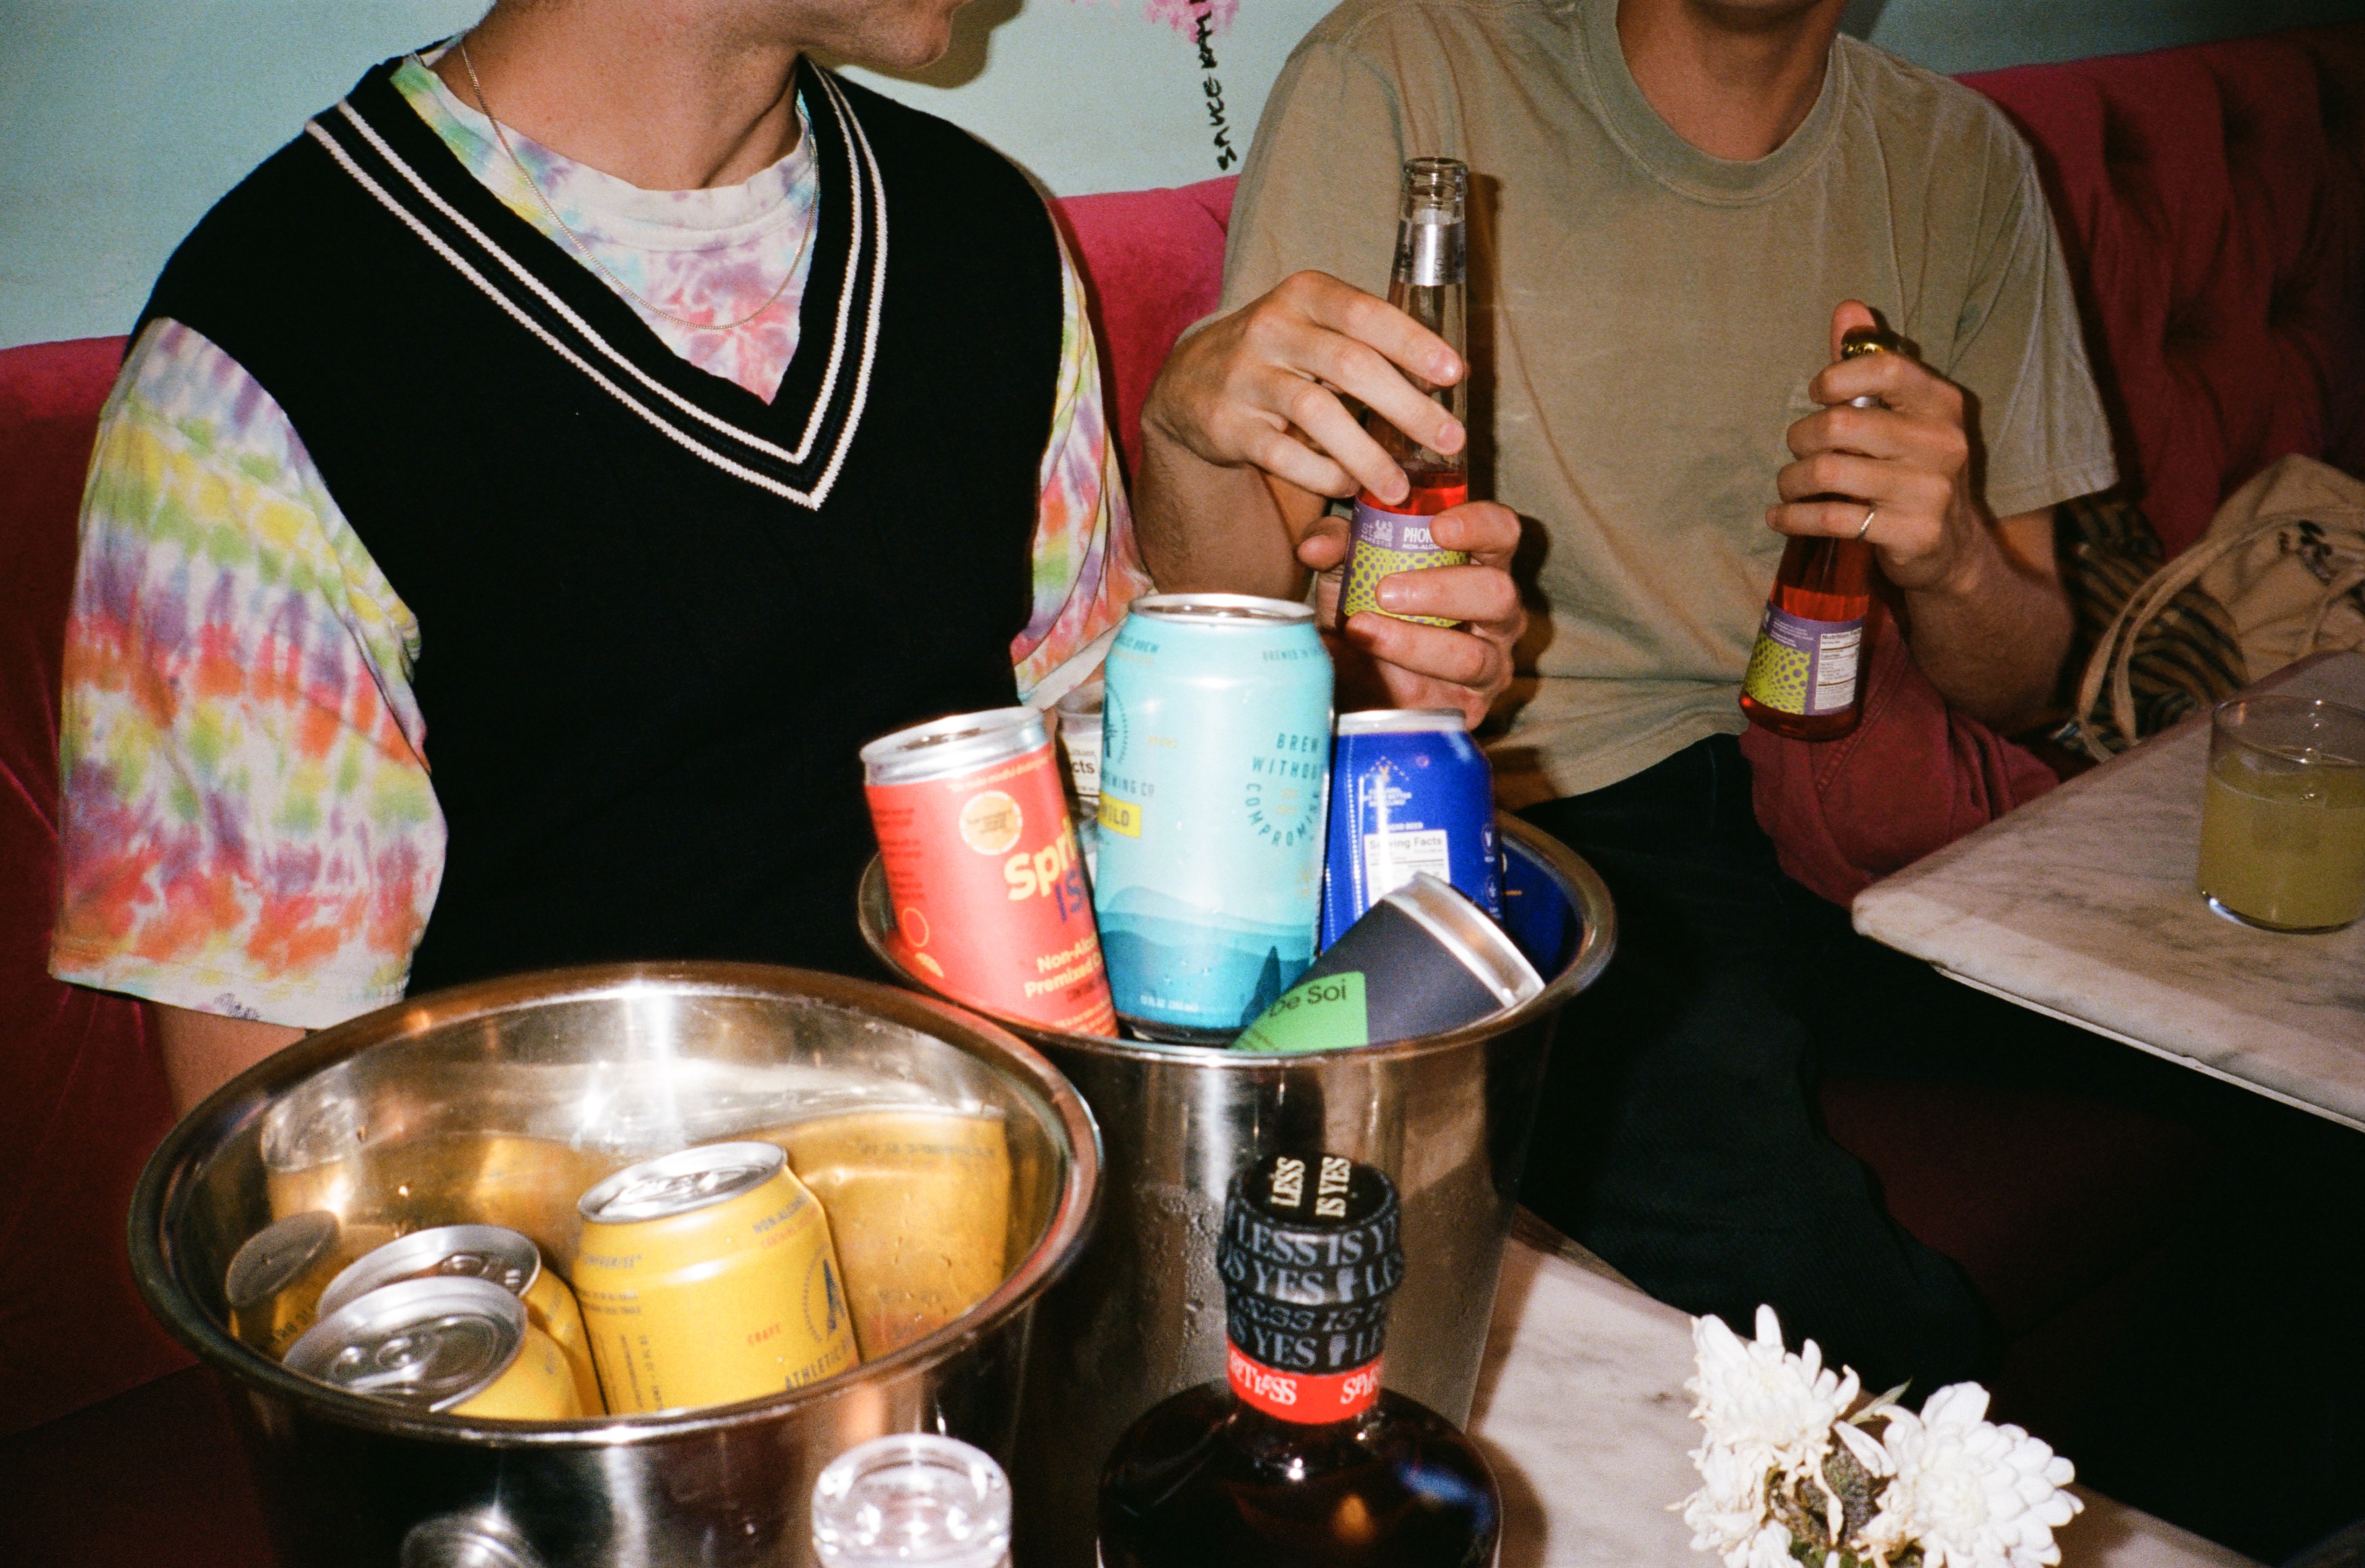 Two people are holding drinks with an ice bucket full of canned beverages on a table, along with small flowers.